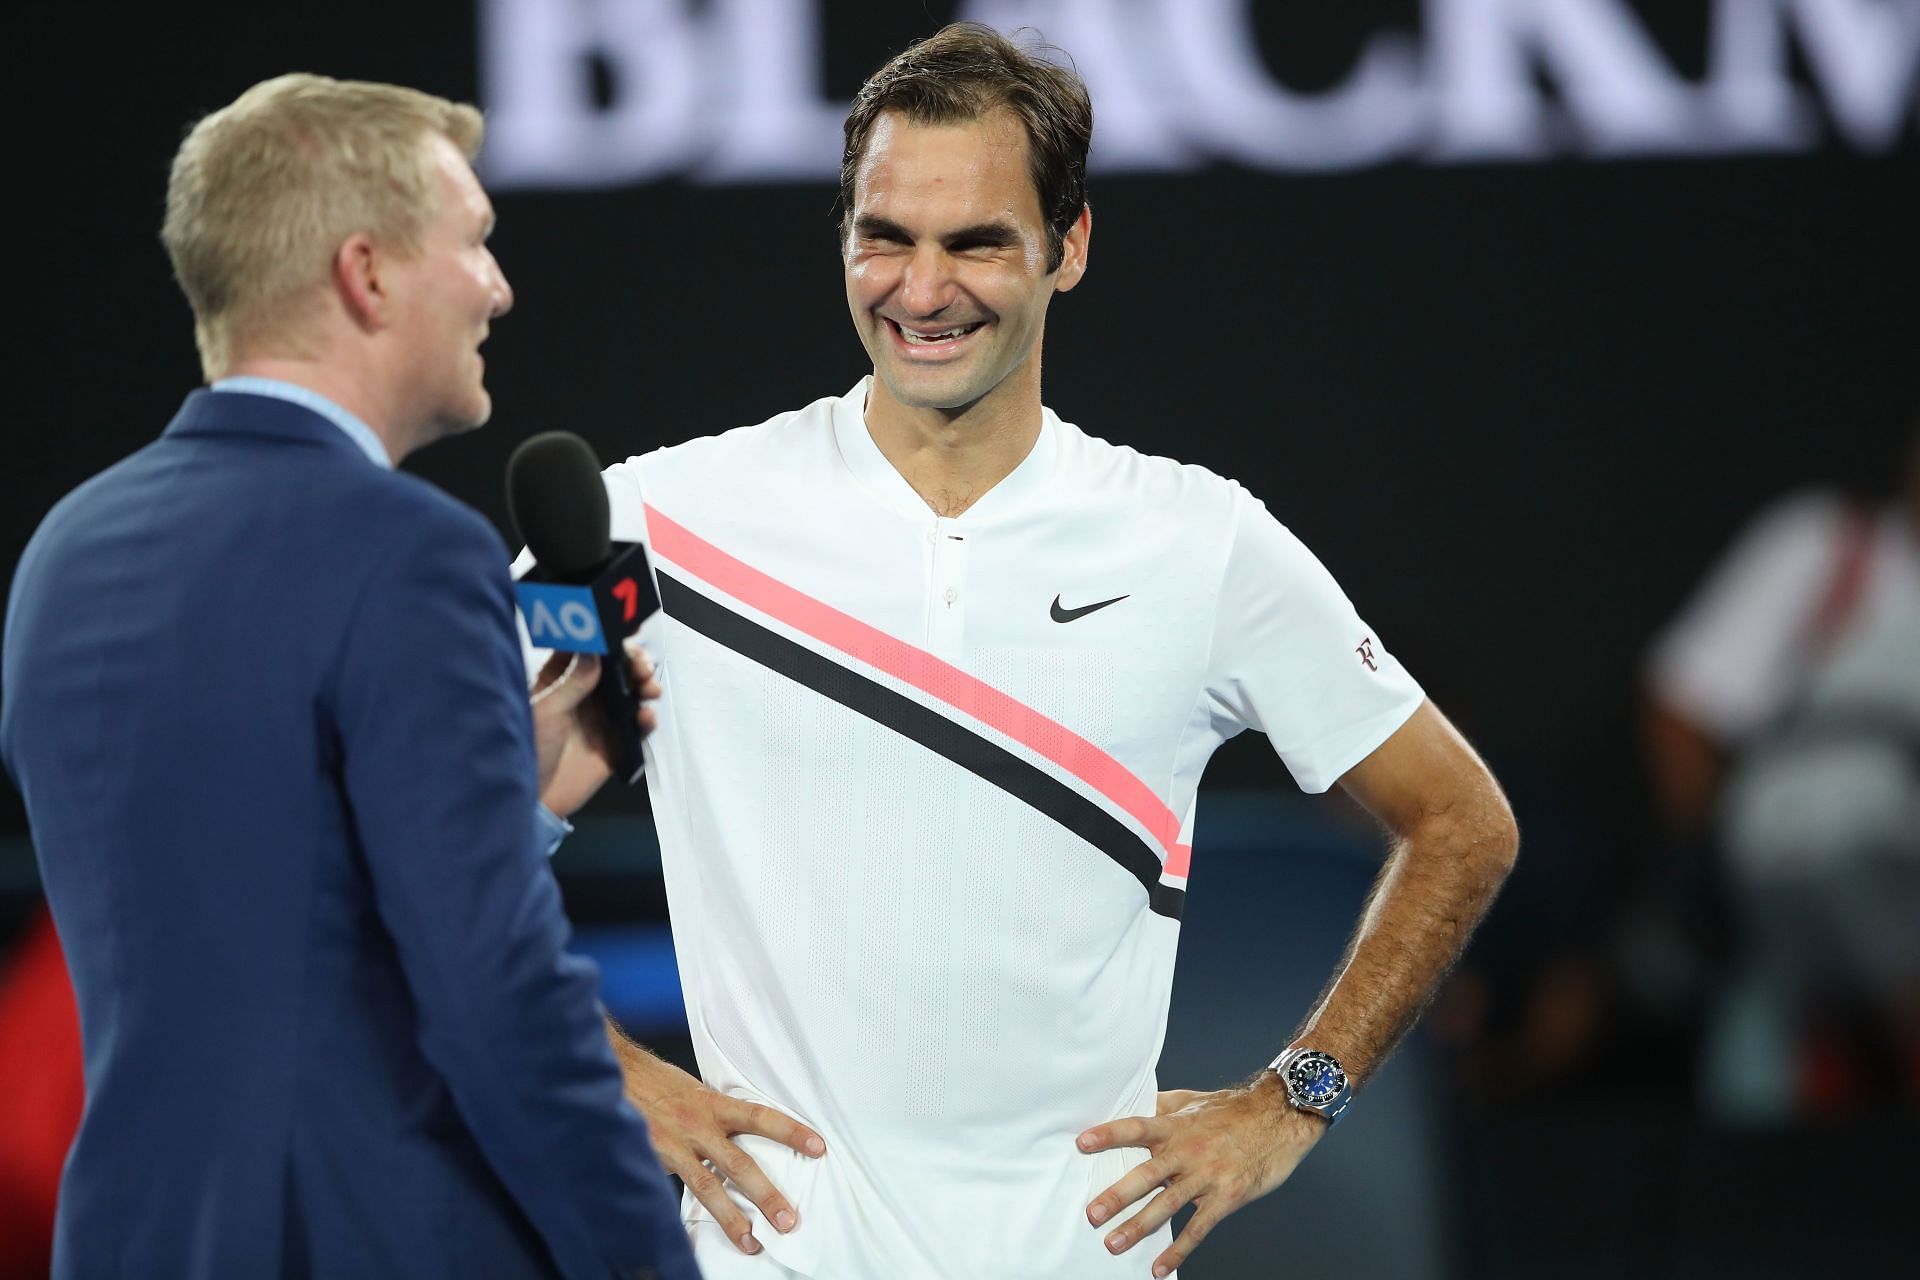 Jim Courier and Roger Federer at the 2018 Australian Open - Day 12